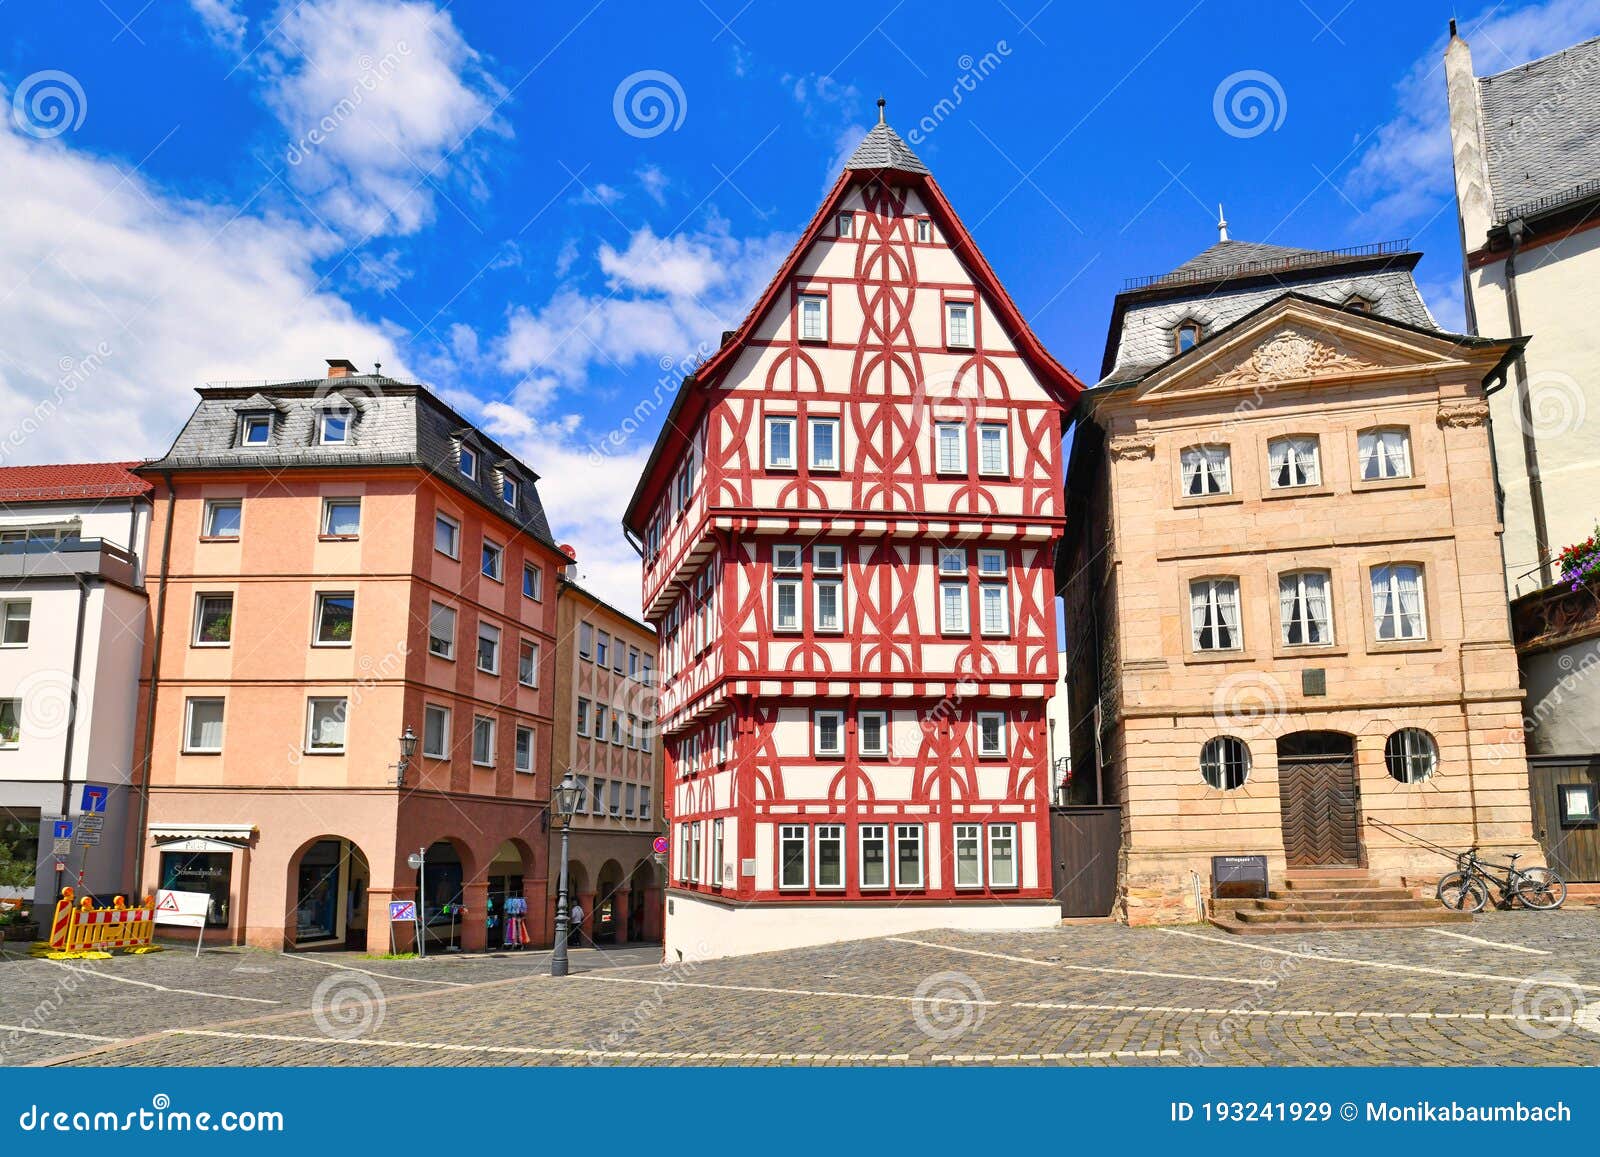 Aschaffenburg germany pictures